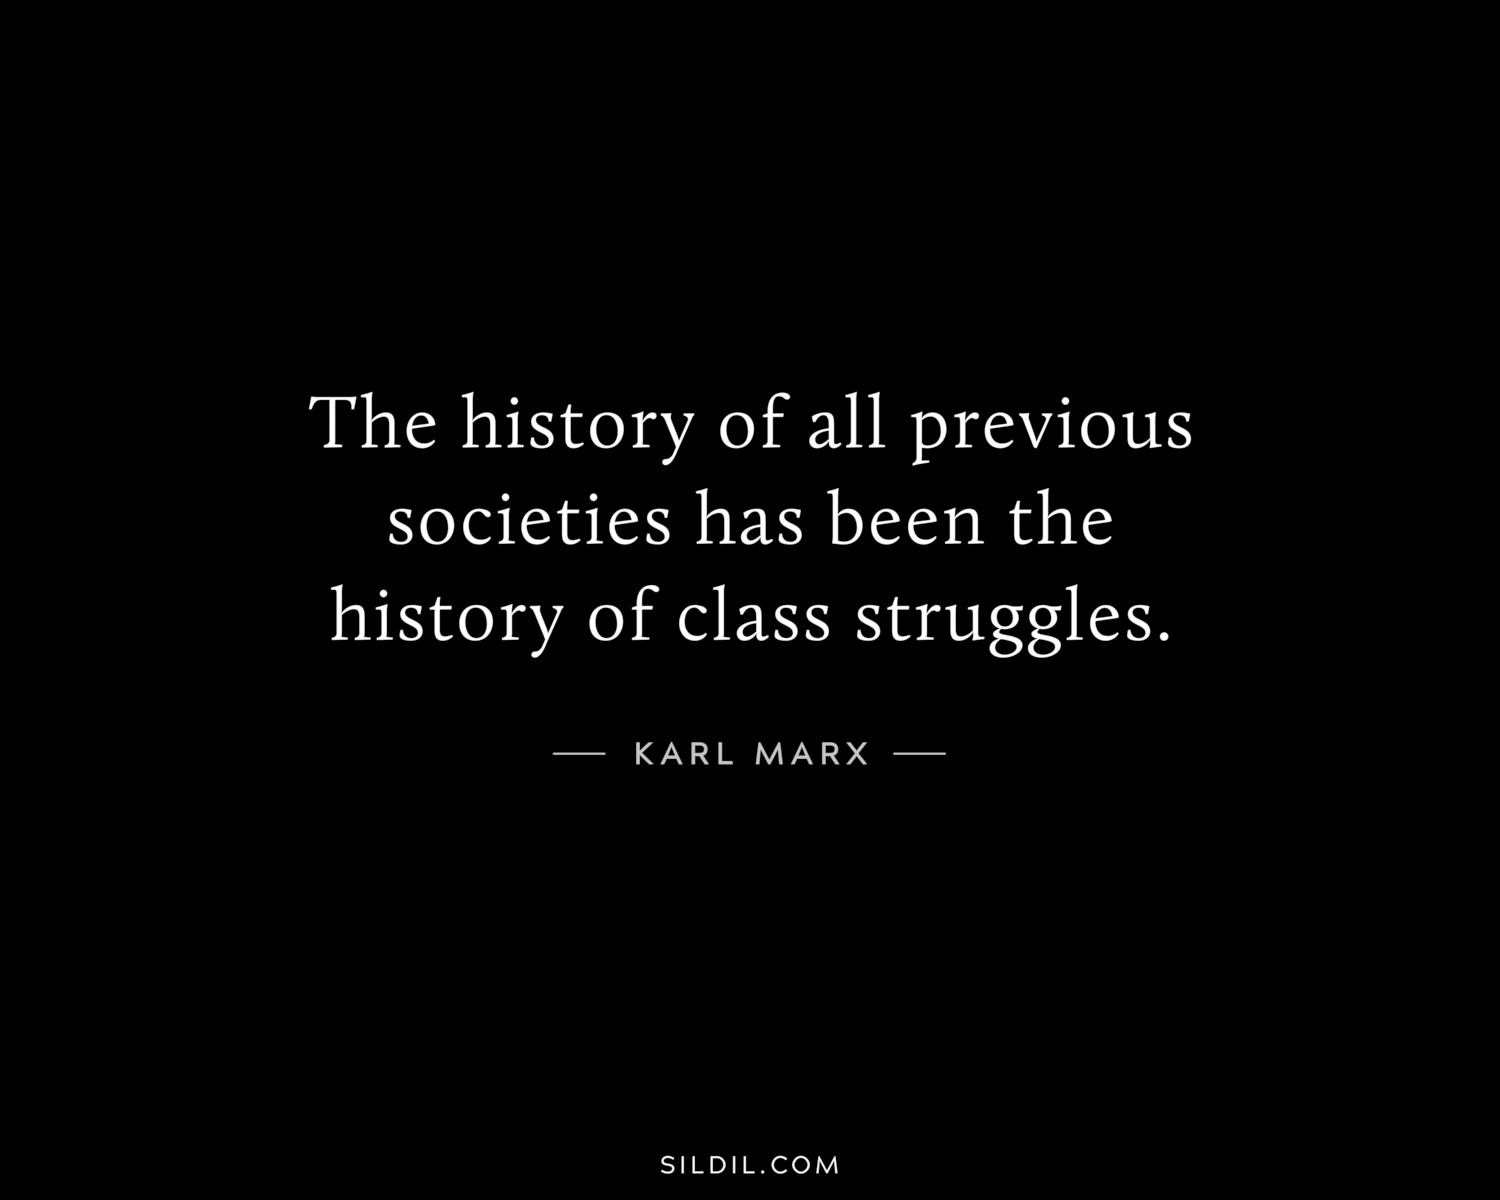 The history of all previous societies has been the history of class struggles.